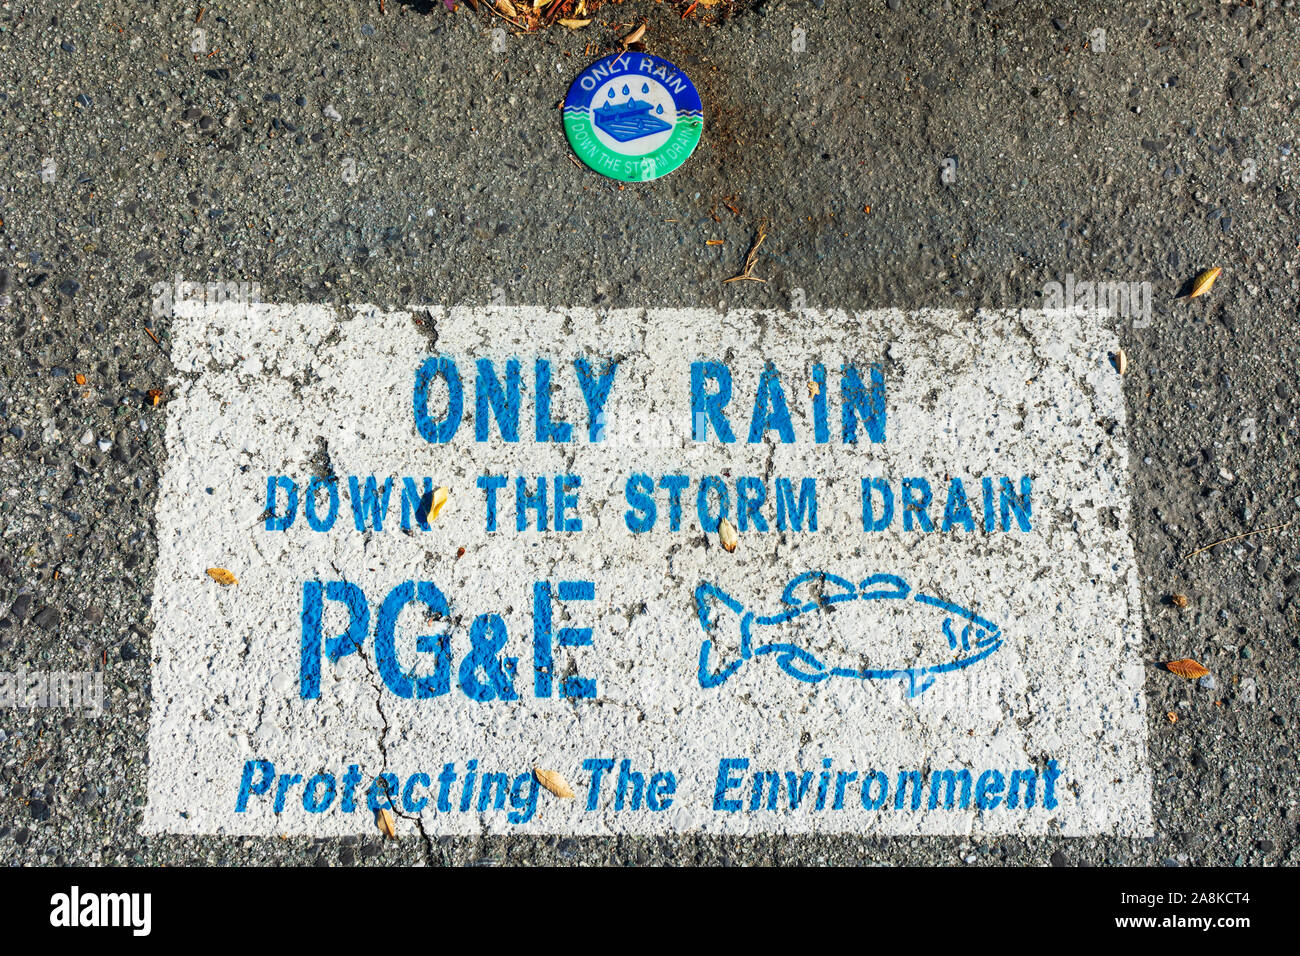 Only rain down to storm drain warning sign PG&E,Pacific Gas and Electric Company, near street drain inlet. Fish Silhouette. Protecting the environment Stock Photo